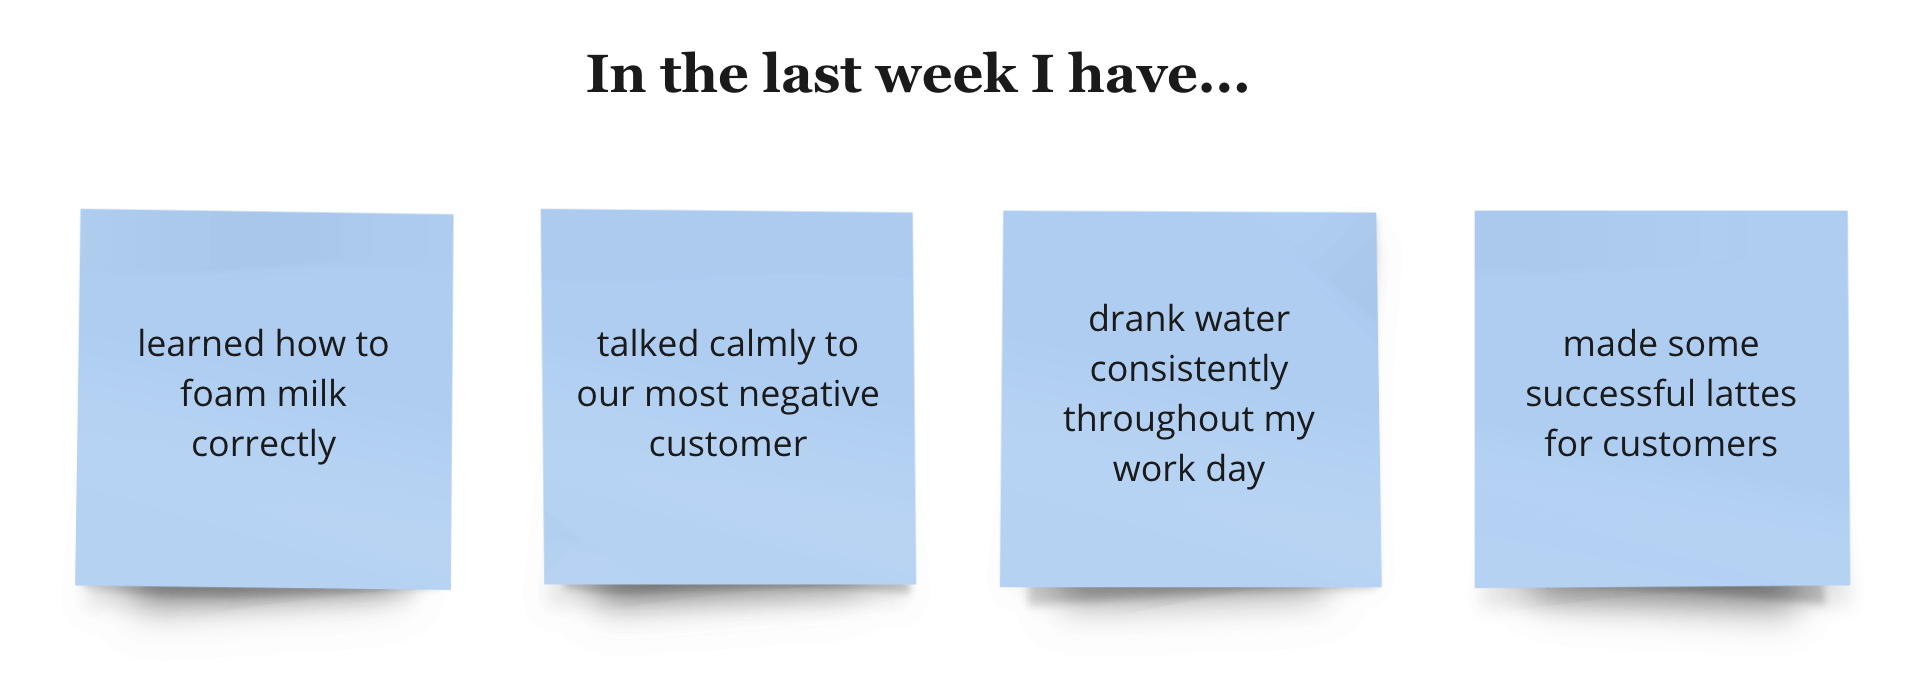 A graphic with a pale blue background showcasing four post-it notes, each containing a statement of personal achievement over the last week. From left to right, the notes read: 'learned how to foam milk correctly,' 'talked calmly to our most negative customer,' 'drank water consistently throughout my work day,' and 'made some successful lattes for customers.' The heading at the top in a larger font states 'In the last week I have...